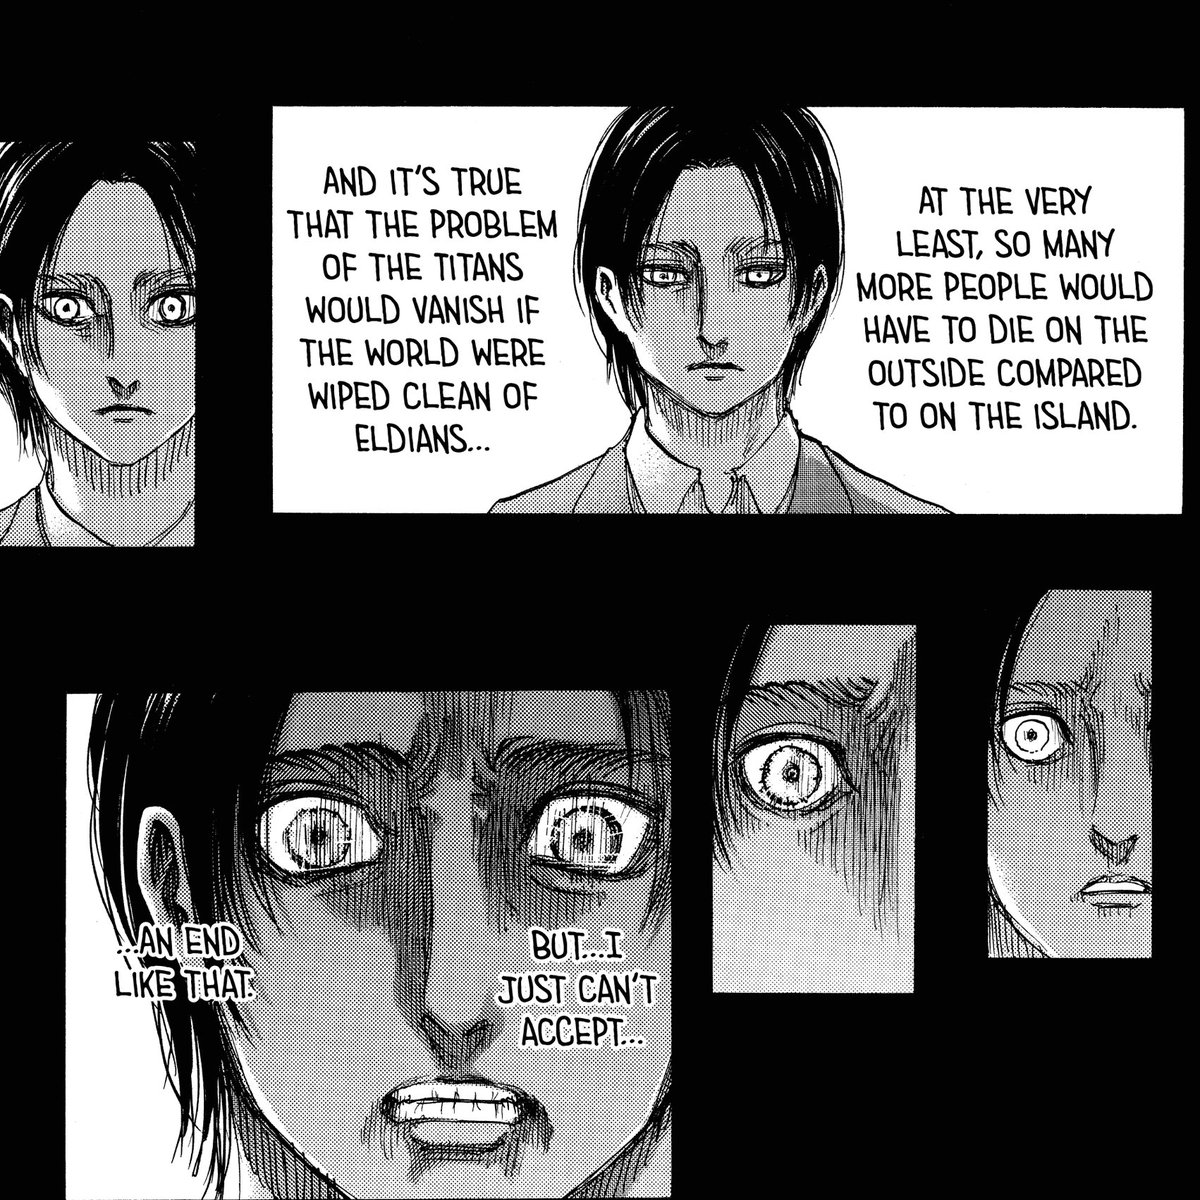 BUT he still right here in this panel himself says he has to do all of this. It isnt as if he is doing this just cause destiny, he has a innate desire to carry it out too.+One other thing is, kid Eren may have thought of Armin so much that he himself manifested him in Paths